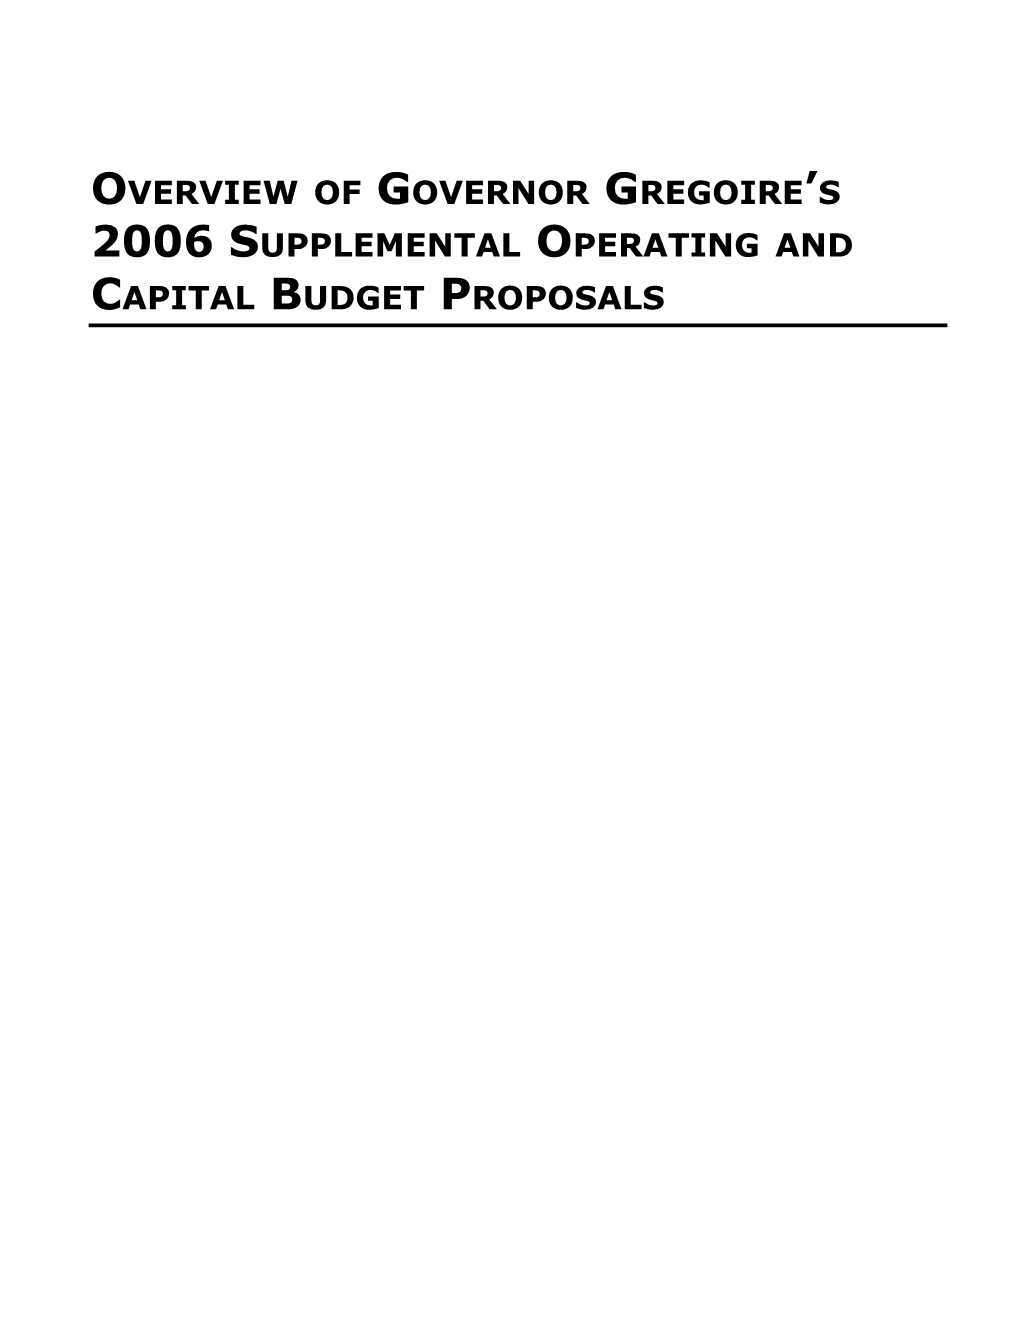 Overview of Governor Gregoire S 2006 Supplemental Operating and Capital Budget Proposals